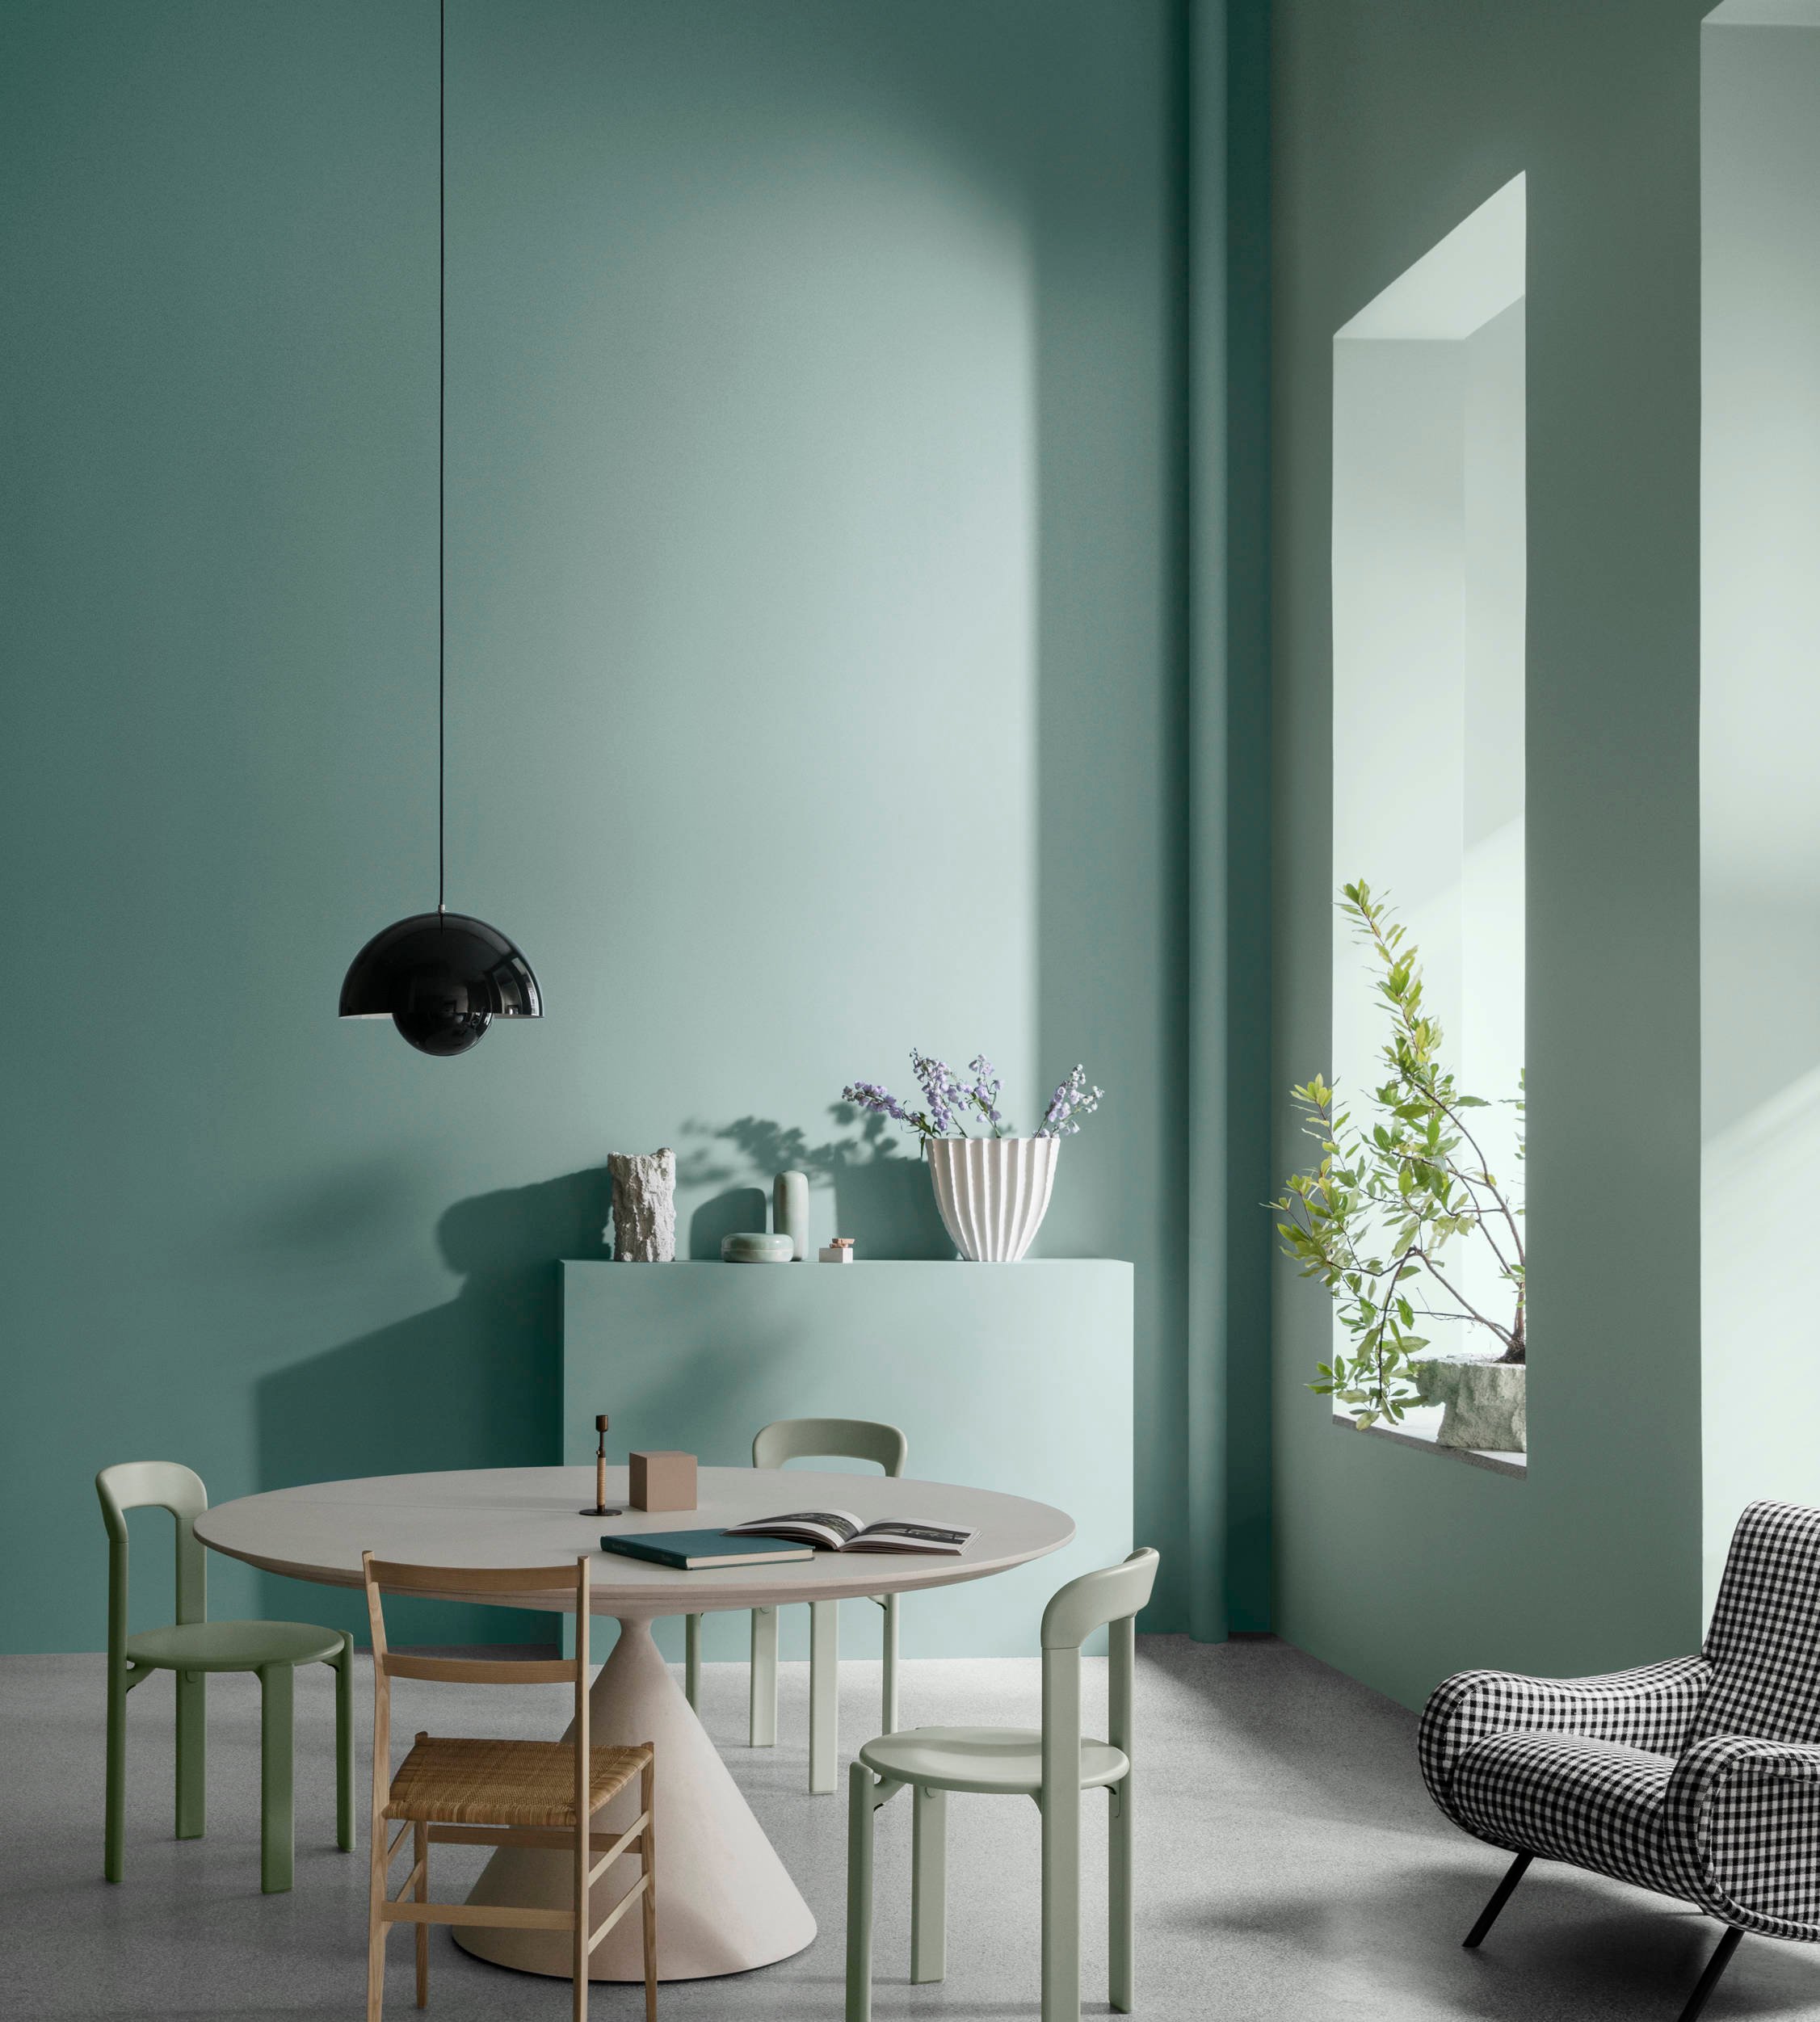 Dining area painted with Jotun Wish 6384 and Jotun Imagine 6383